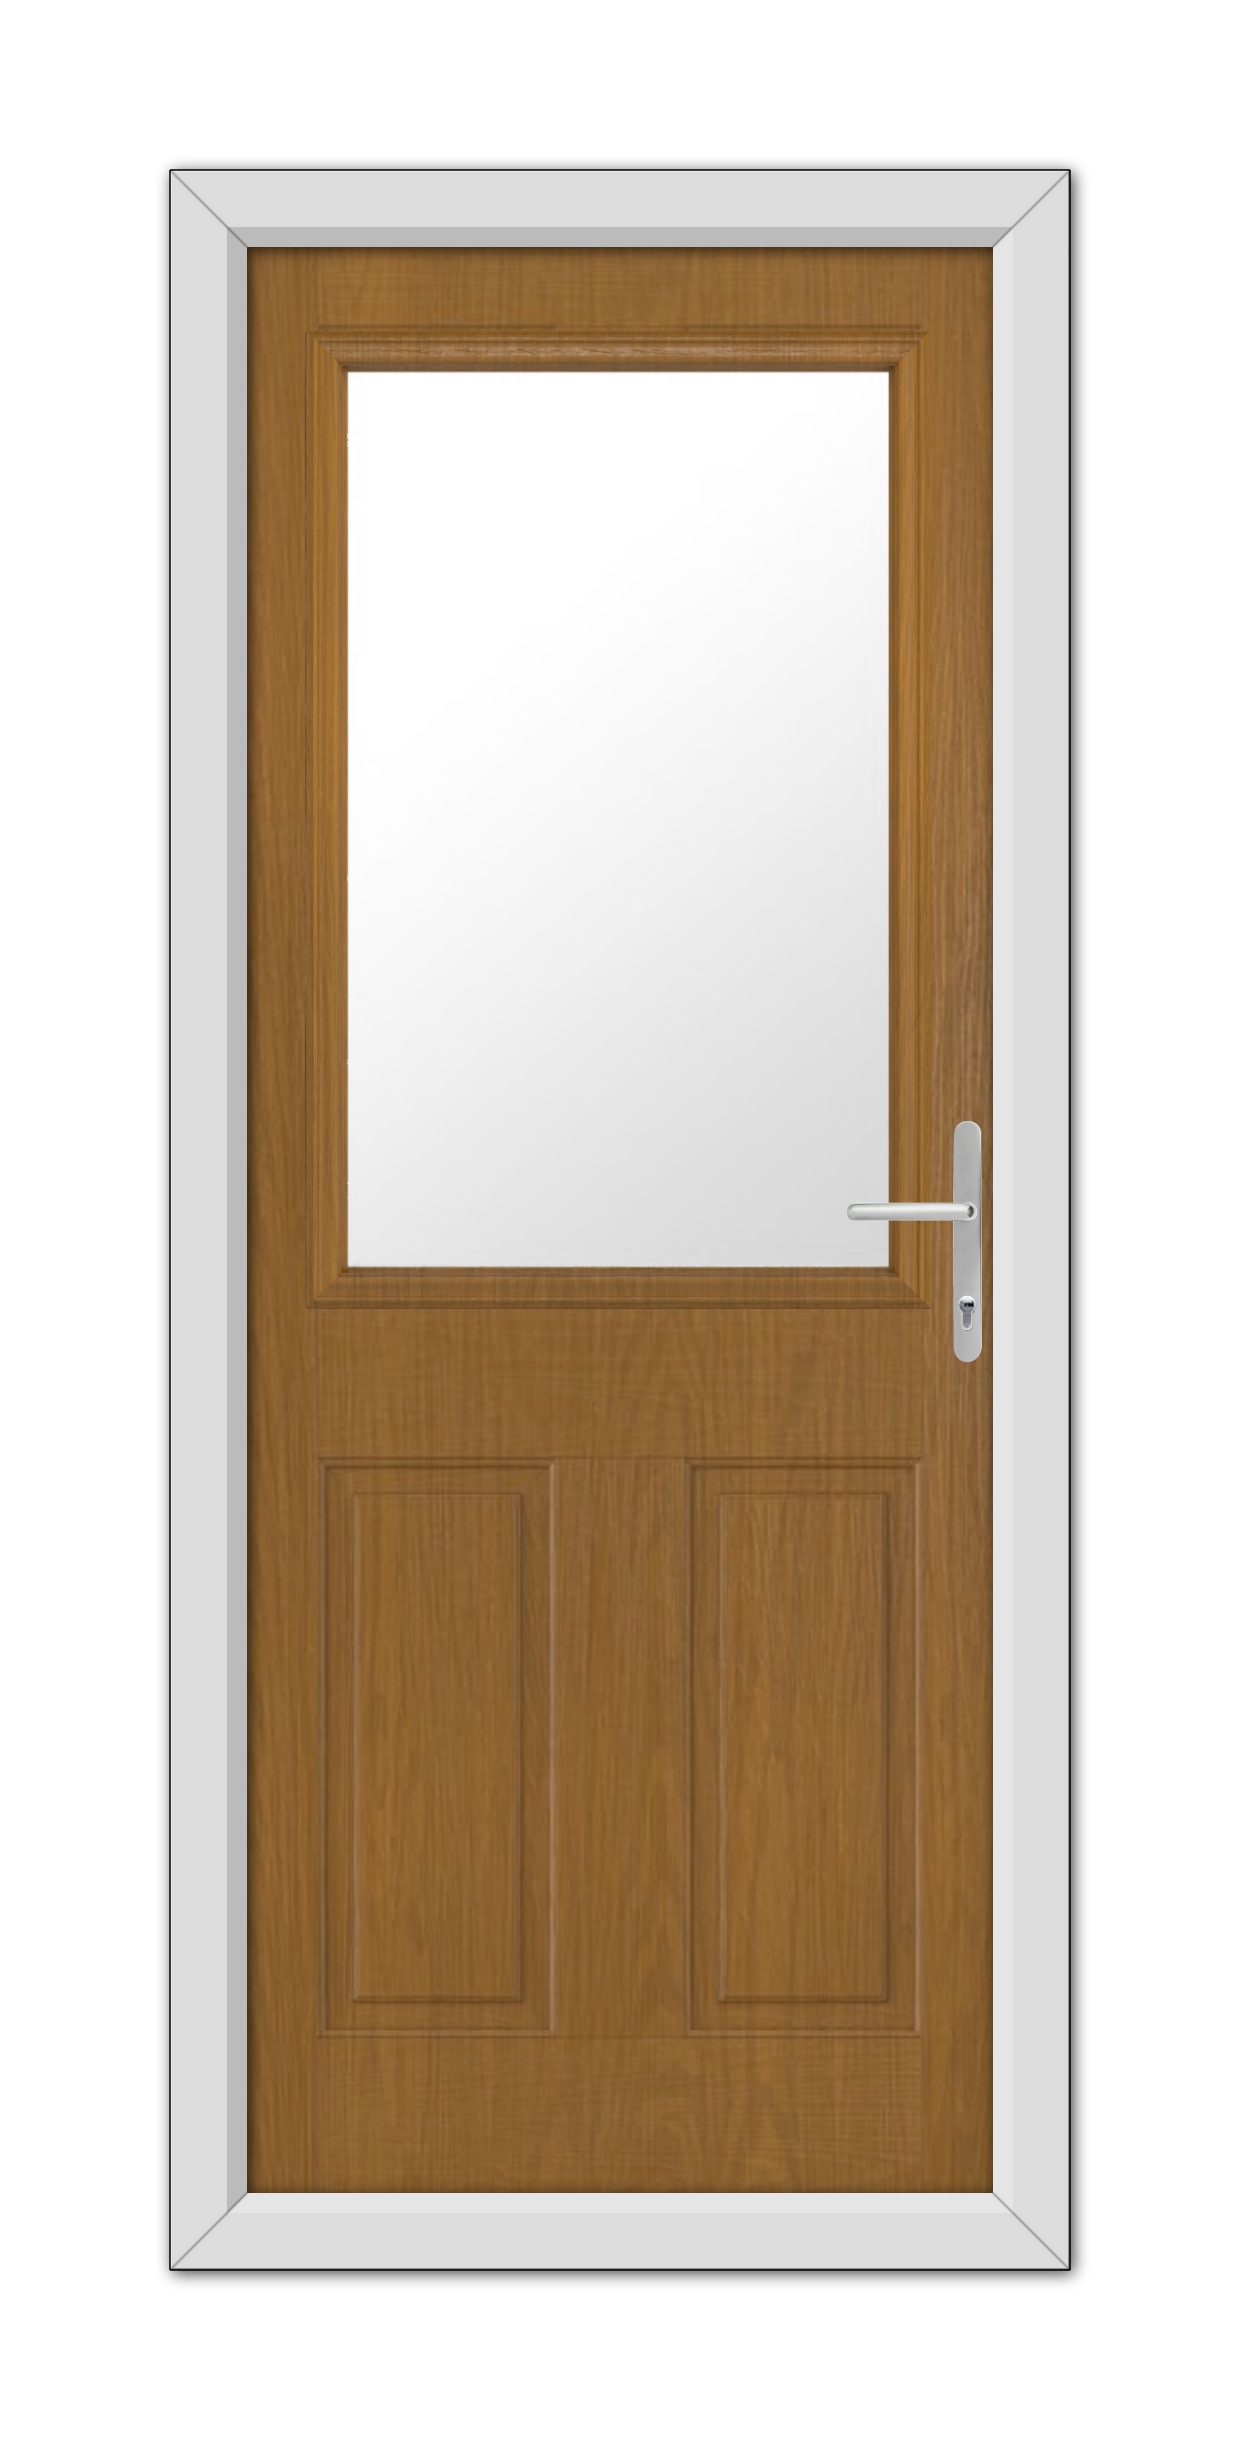 A closed Oak Buxton Composite Door 48mm Timber Core with a white frame and a rectangular glass pane at the top, featuring a modern handle on the right side.